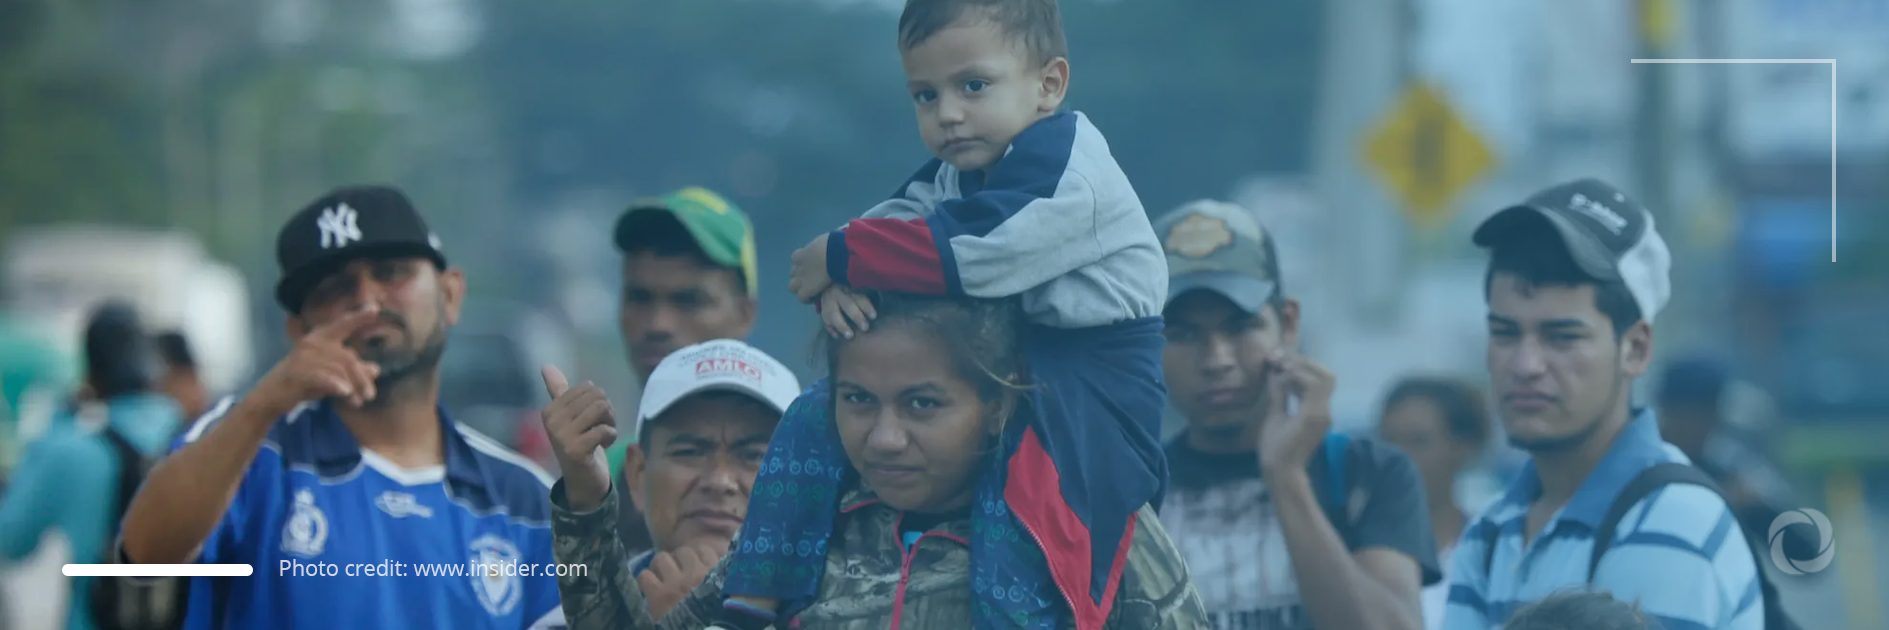 U.S. announces strategy for migrants from Central America